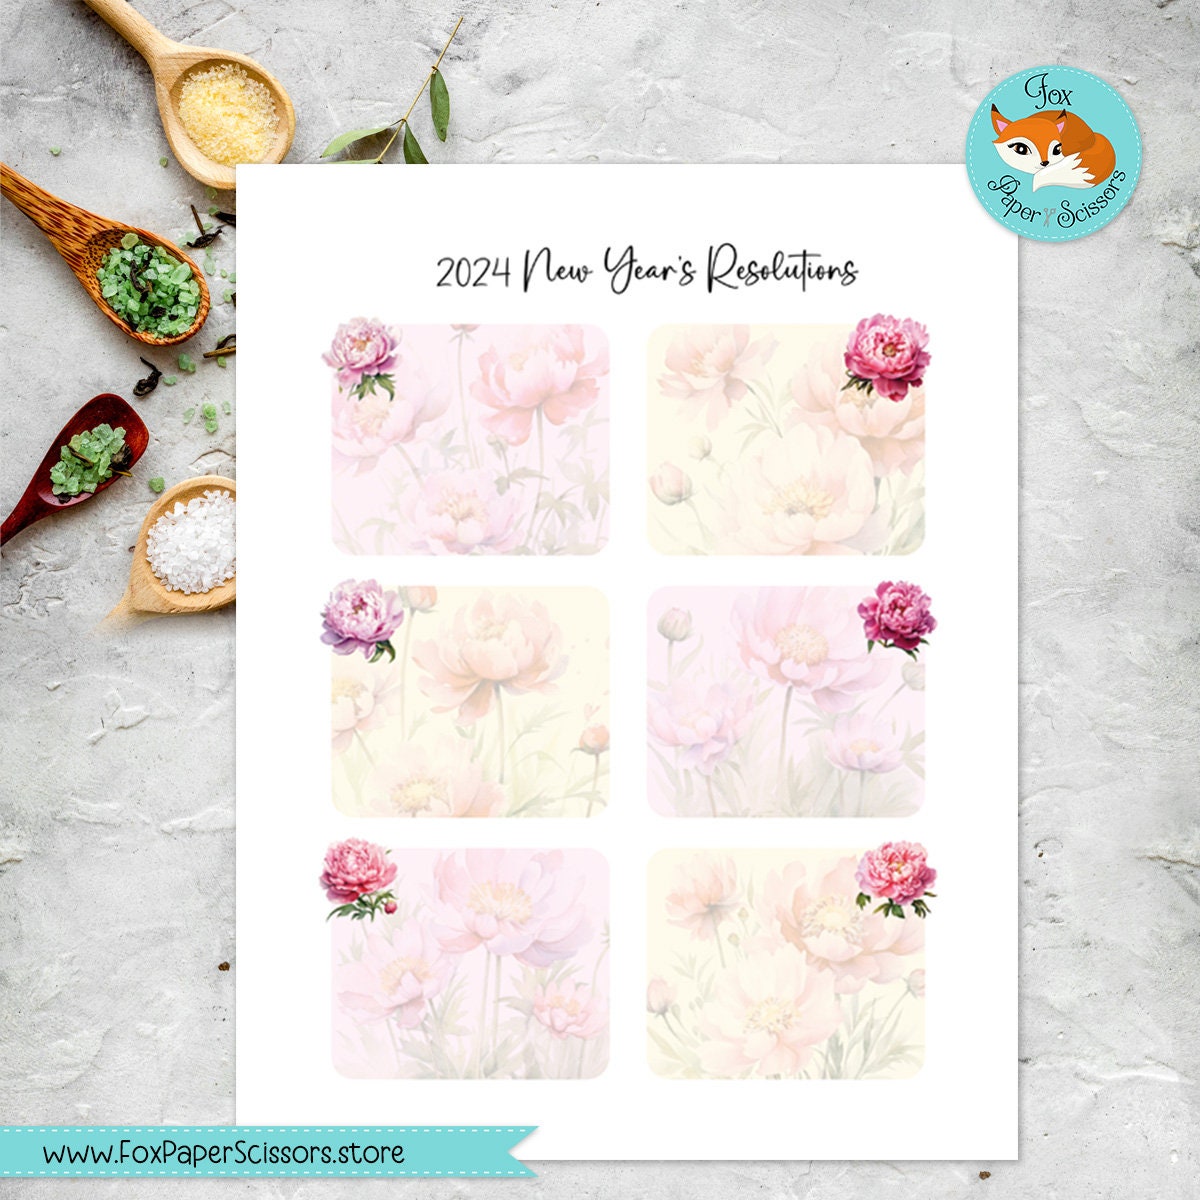 planner stickers,printable stickers,happy planner,printable,planner,functional,printable planner stickers,cute stickers,journal stickers,planner sticker,bujo stickers,winter stickers,erin condren stickers,new year, new years,resolution,goal,habit